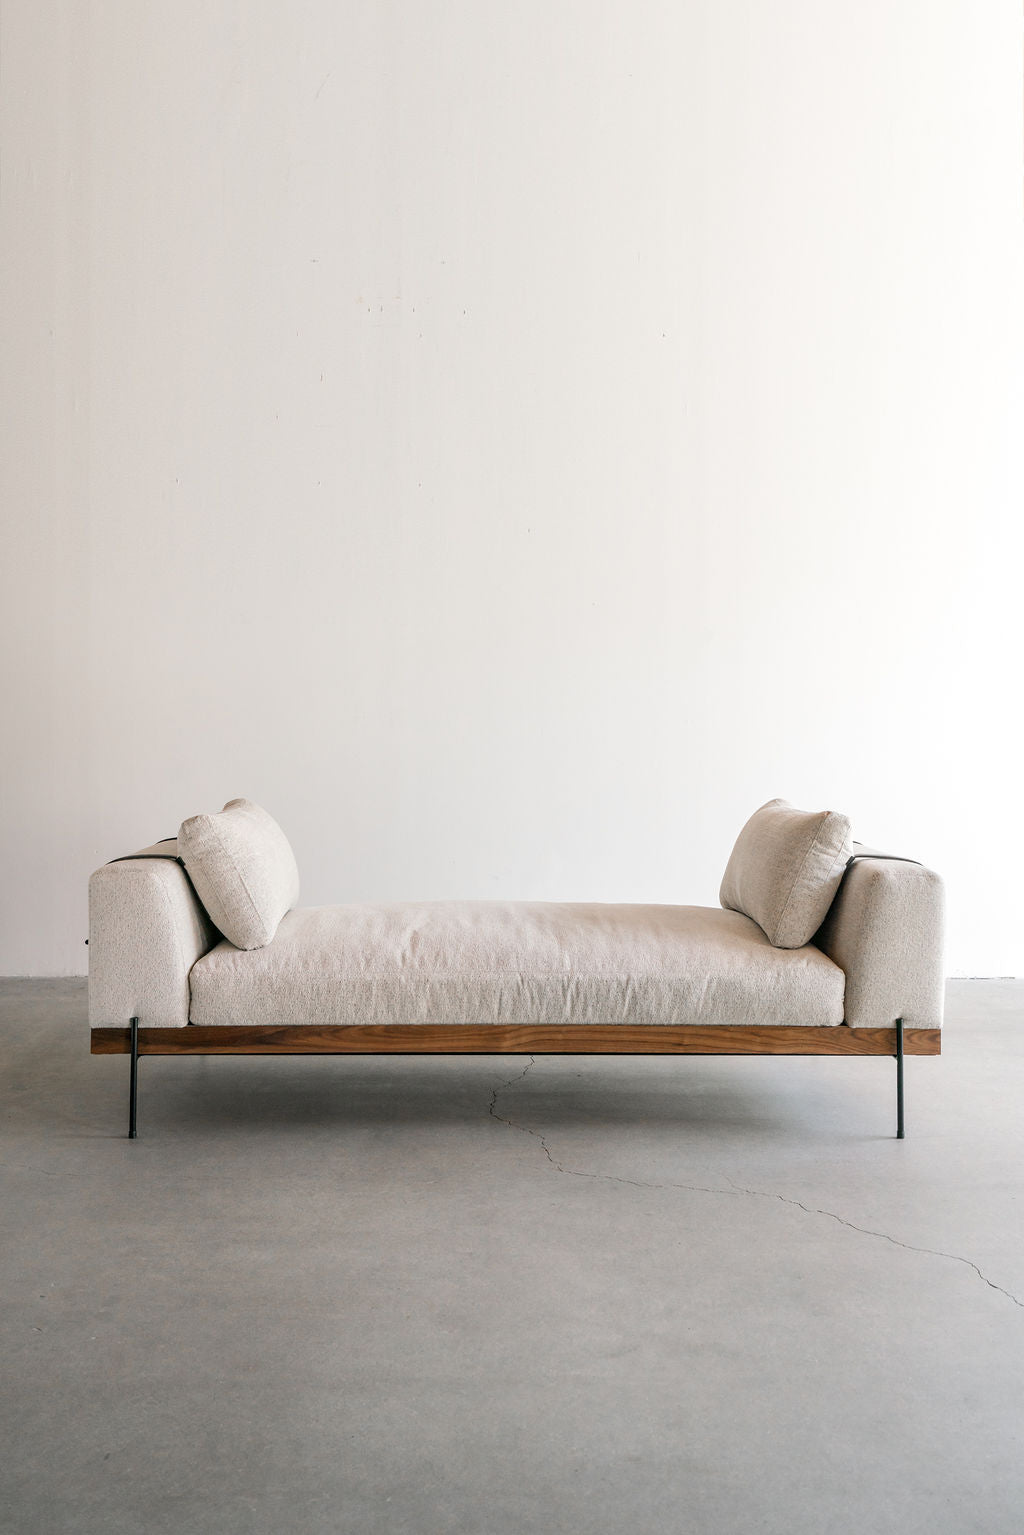 Rivera Daybed